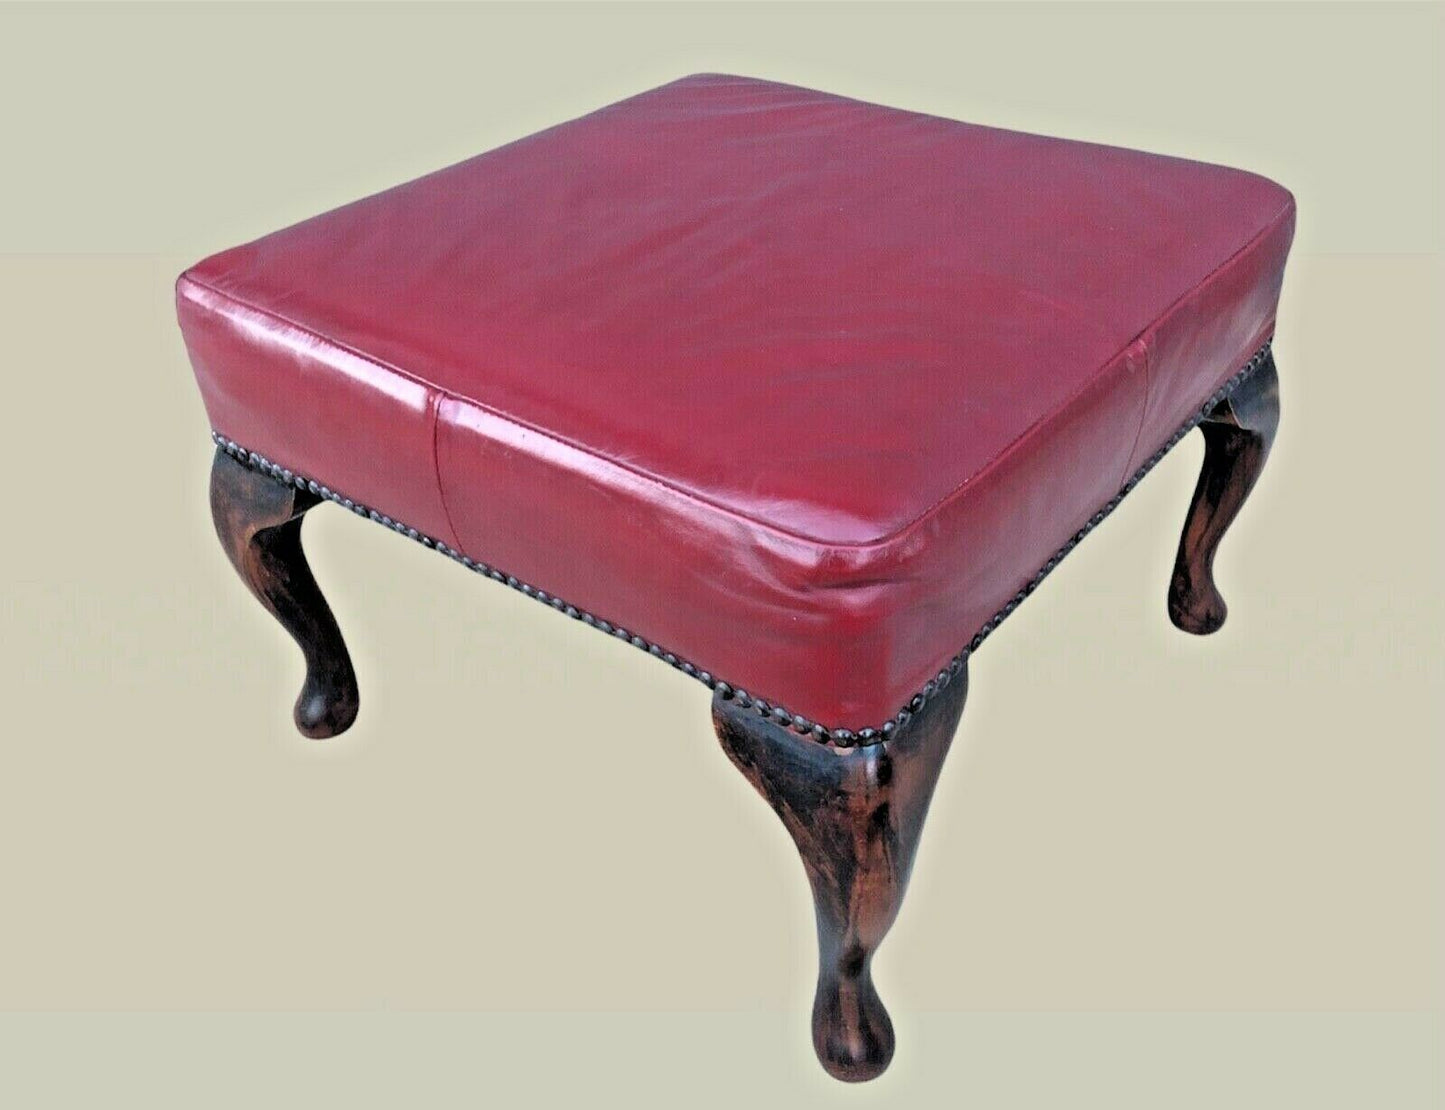 023.....Superior Quality Vintage Red Leather Footstool ( sold )